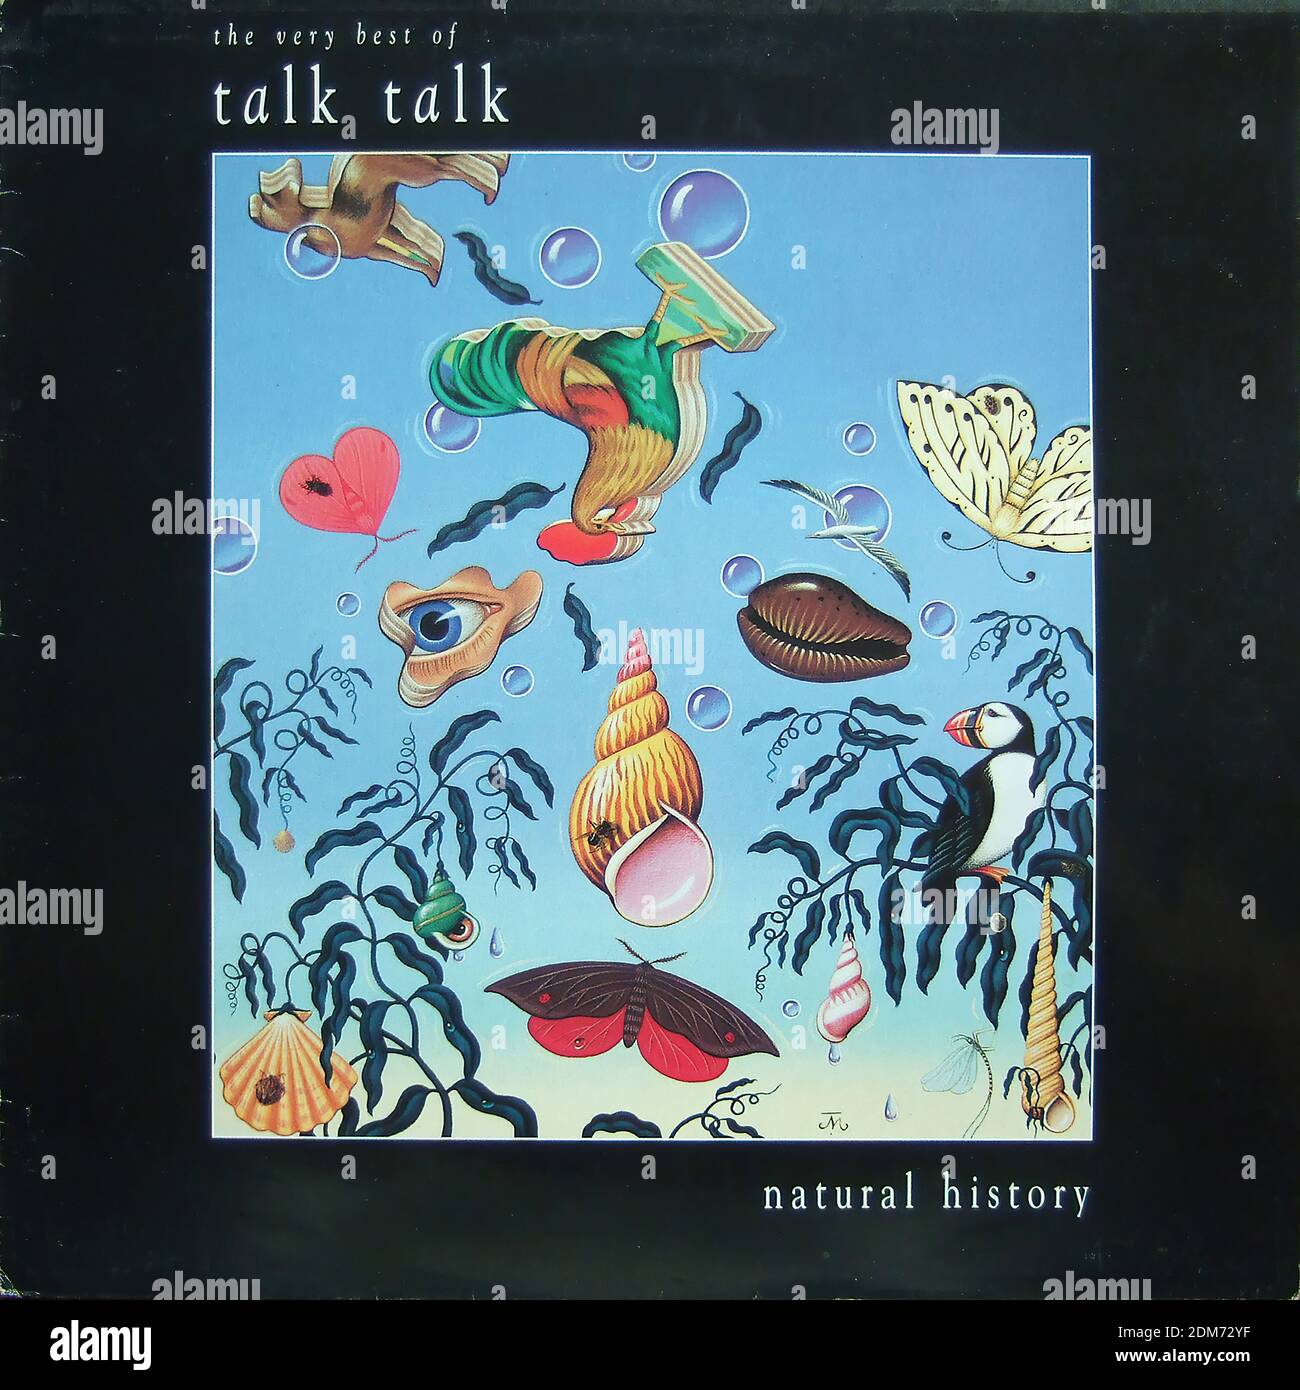 The very best of Talk Talk - Natural History - Vintage vinyl album cover Stock Photo